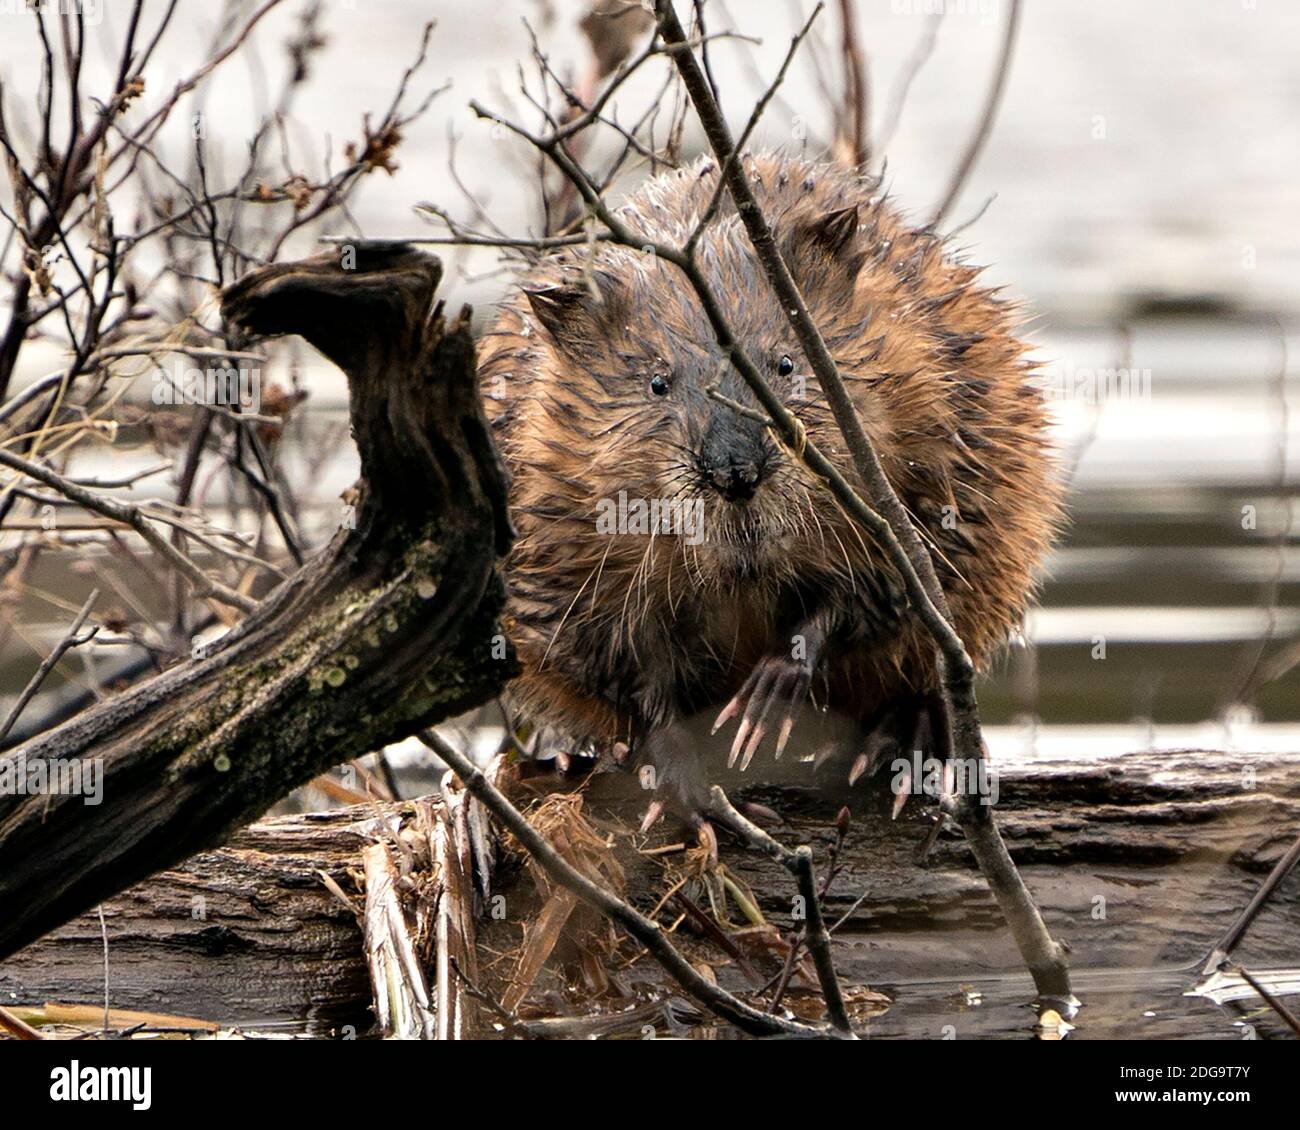 Muskrat stock photos. Muskrat sitting on a log displaying its brown wet fur, with a blur water background in its environment and habitat. Image. Pictu Stock Photo